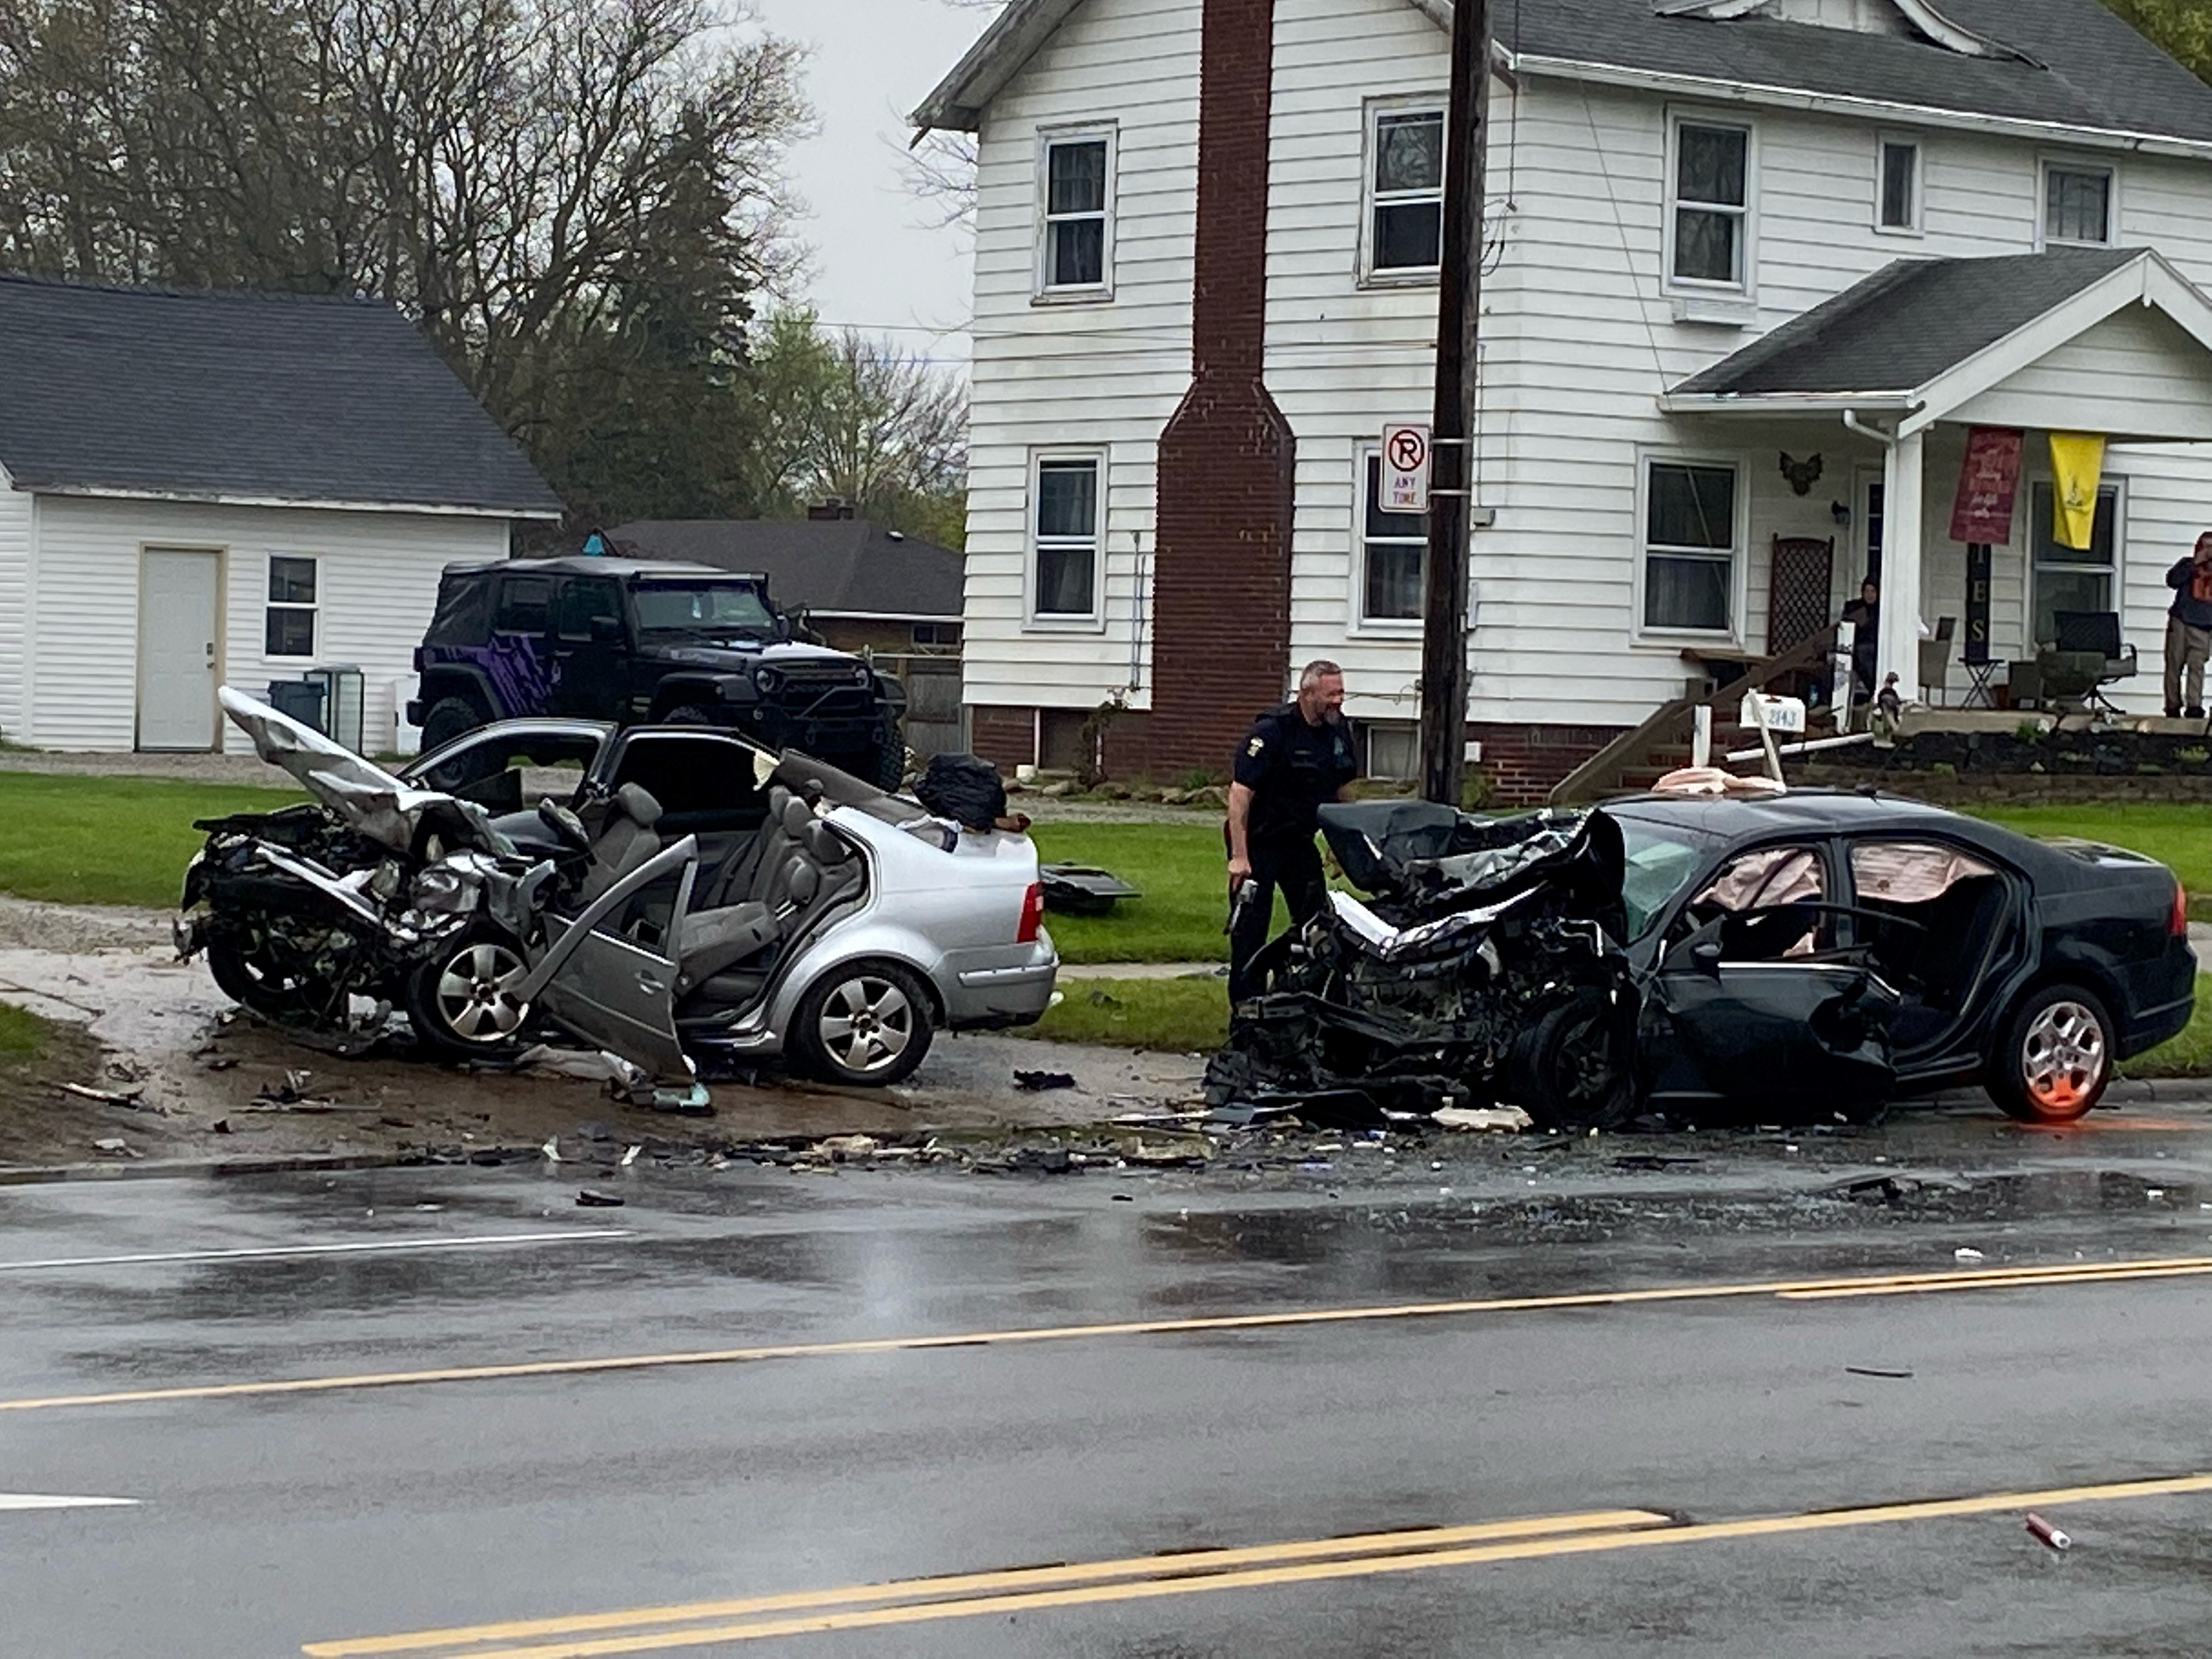 Person hospitalized after car crashes into south Toledo building